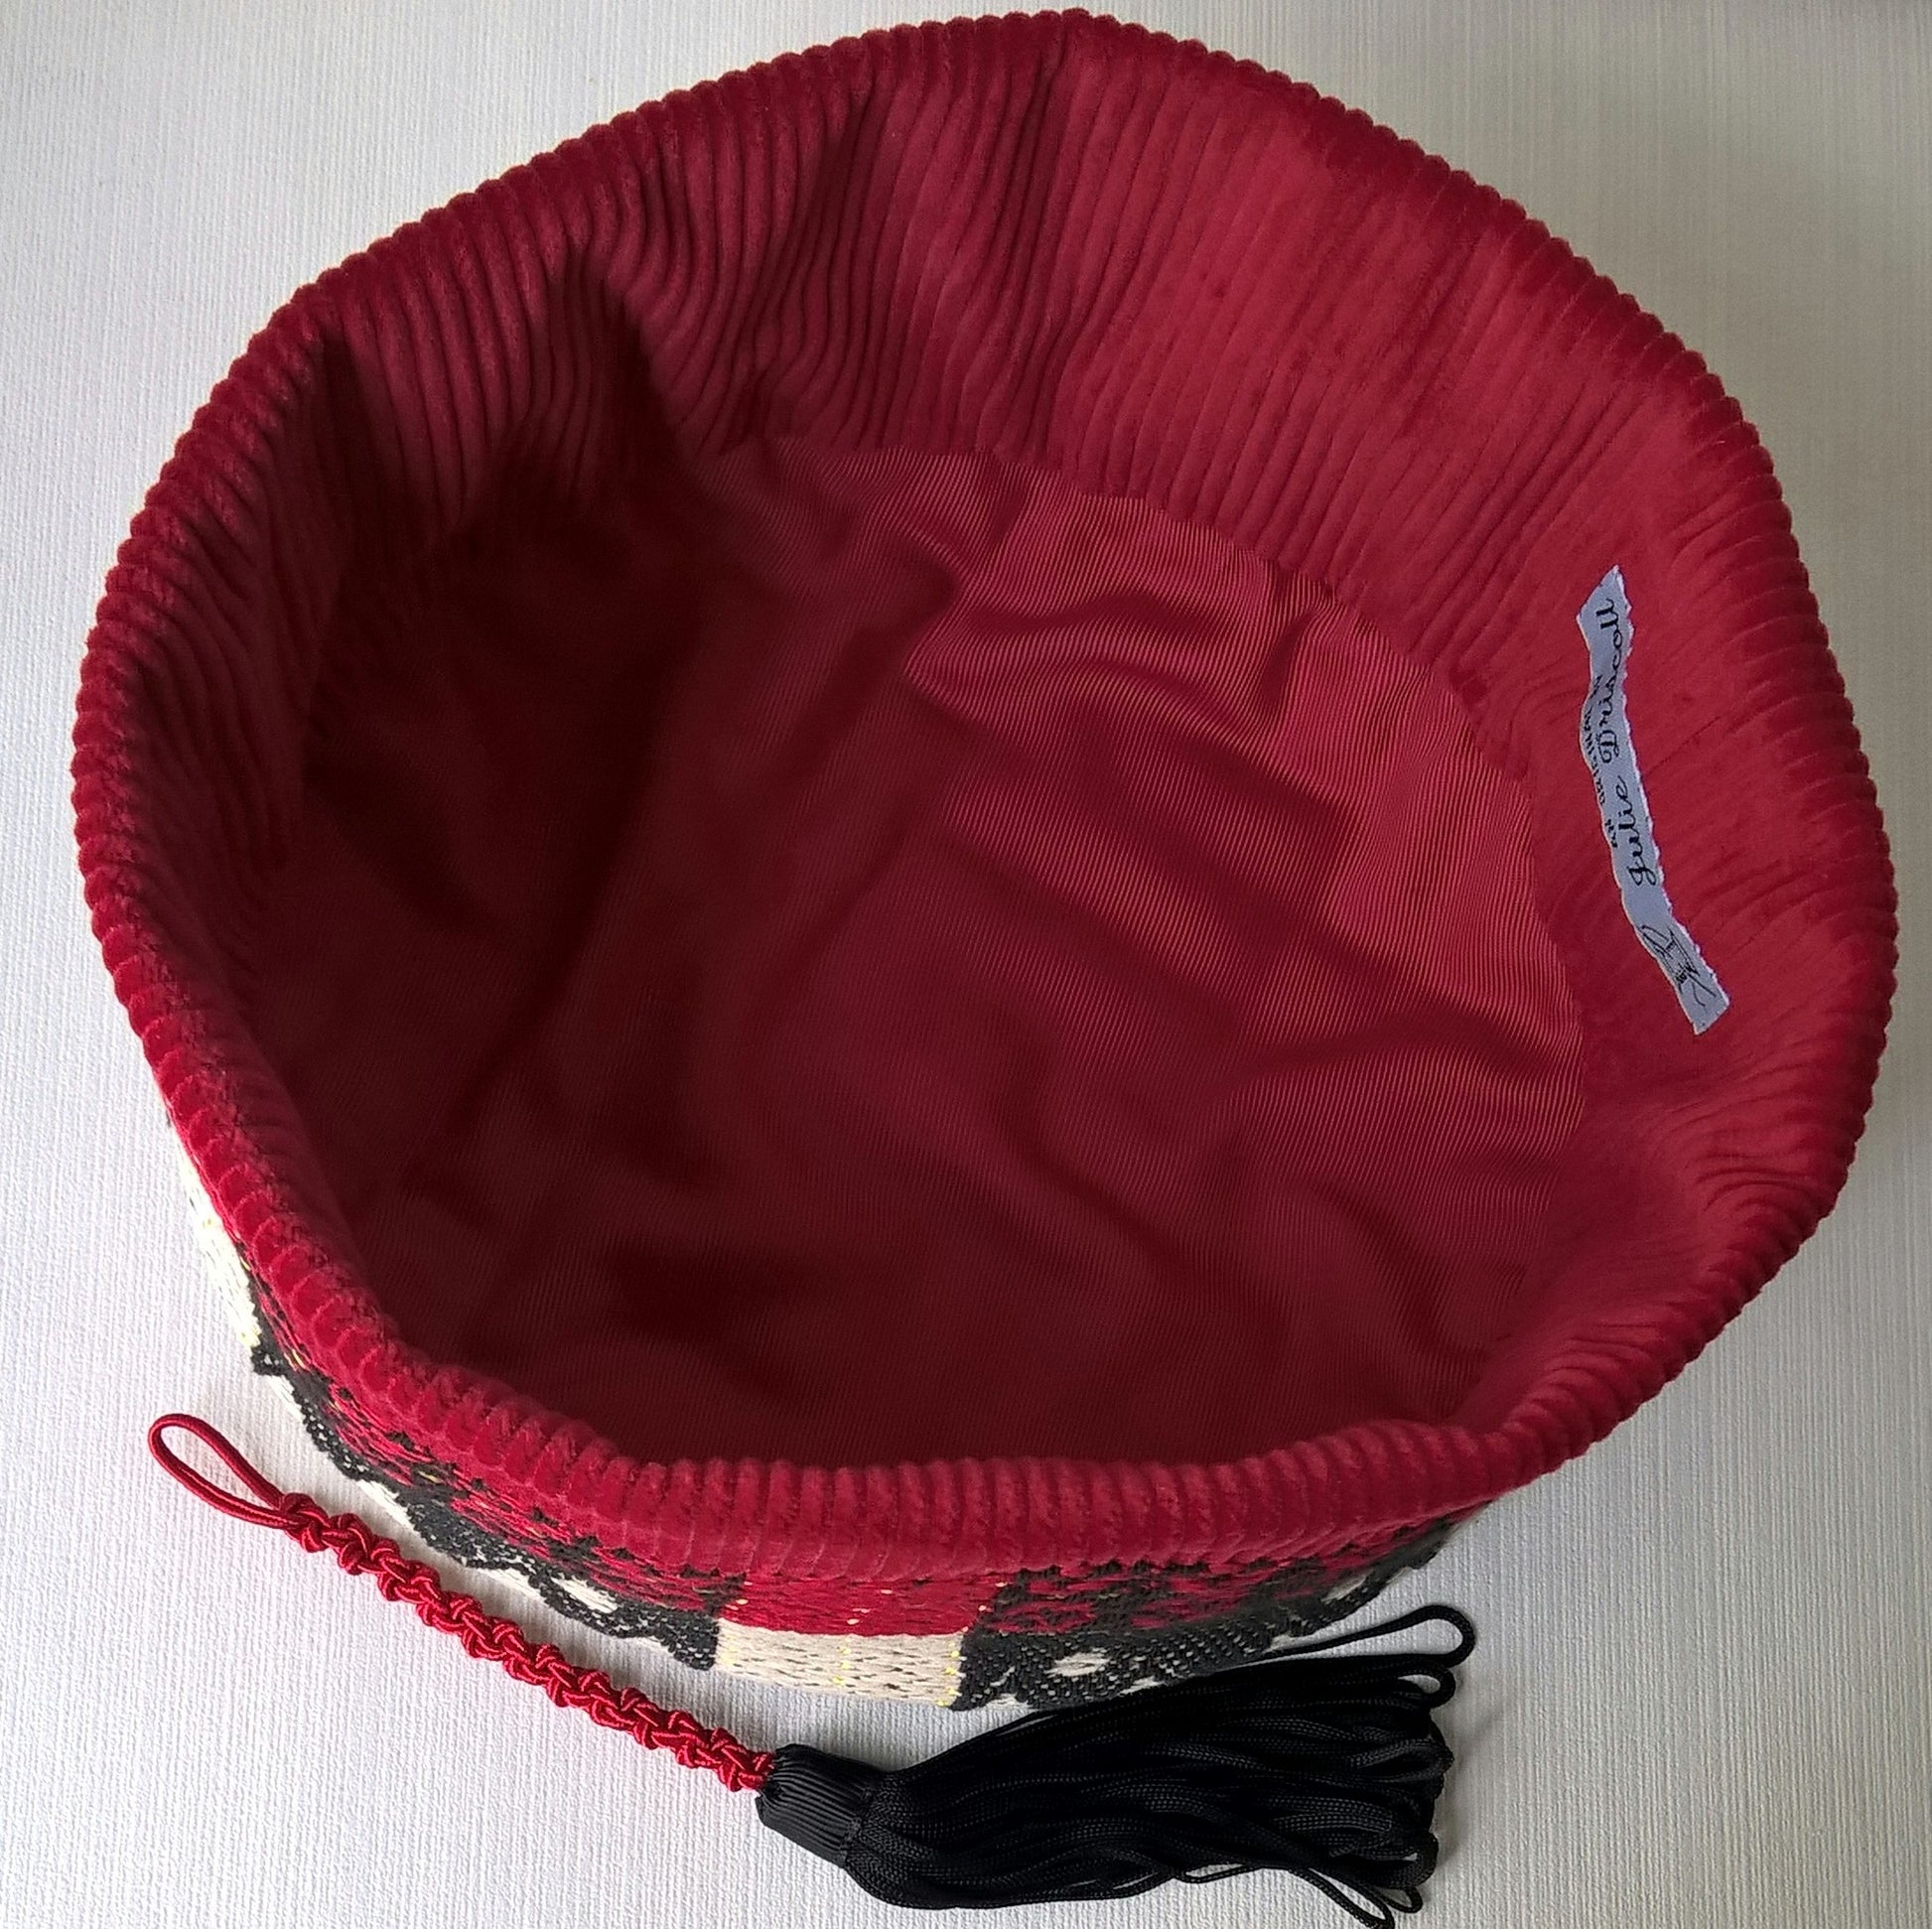 The smoking cap has a red cotton lining